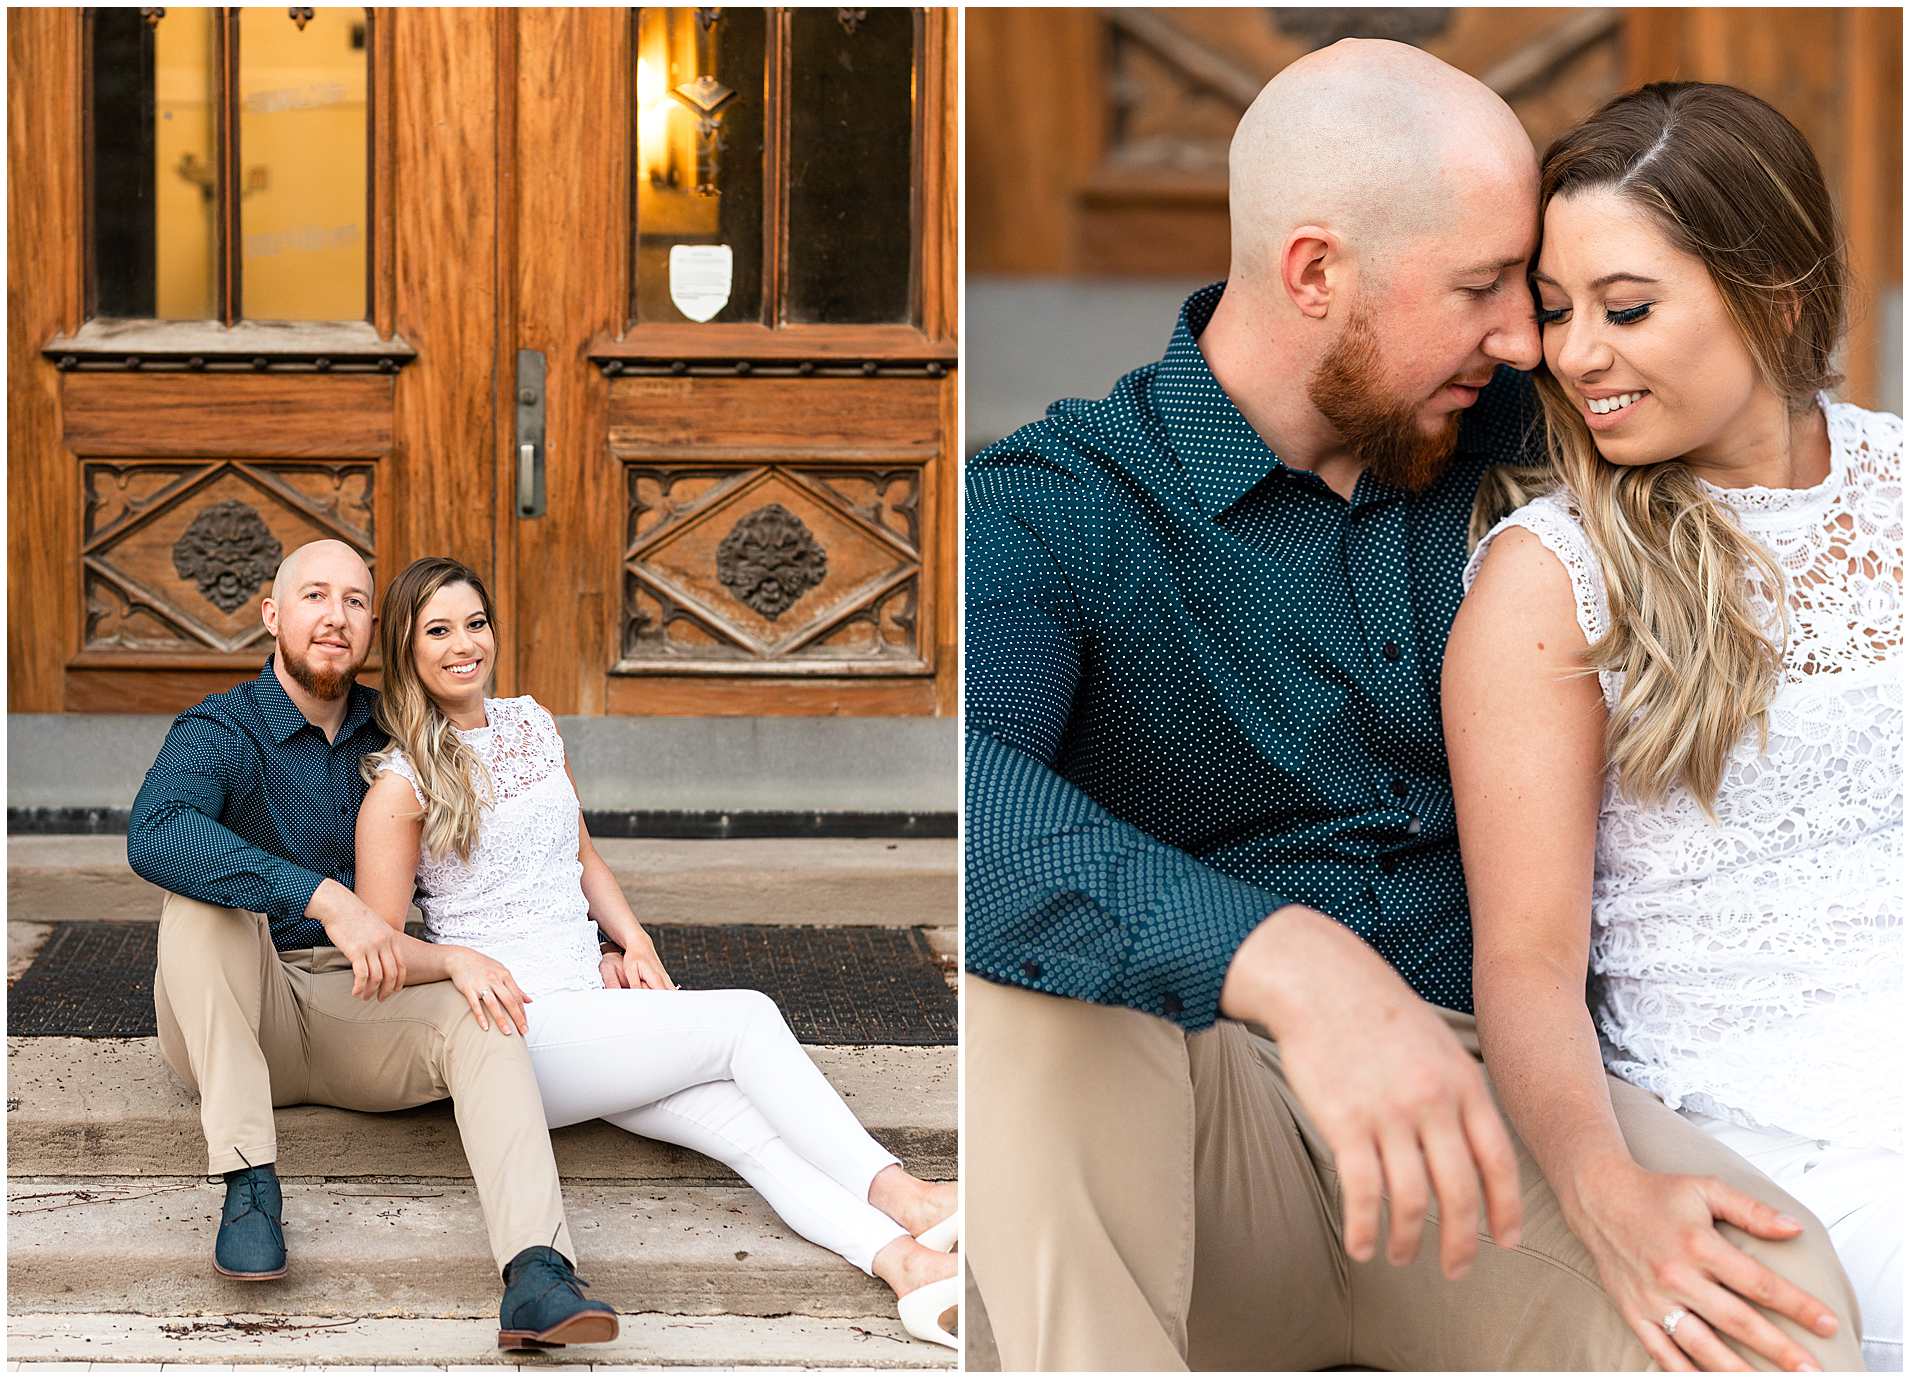 Summer Engagement Photos at the University of Chicago campus in Chicago, Illinois